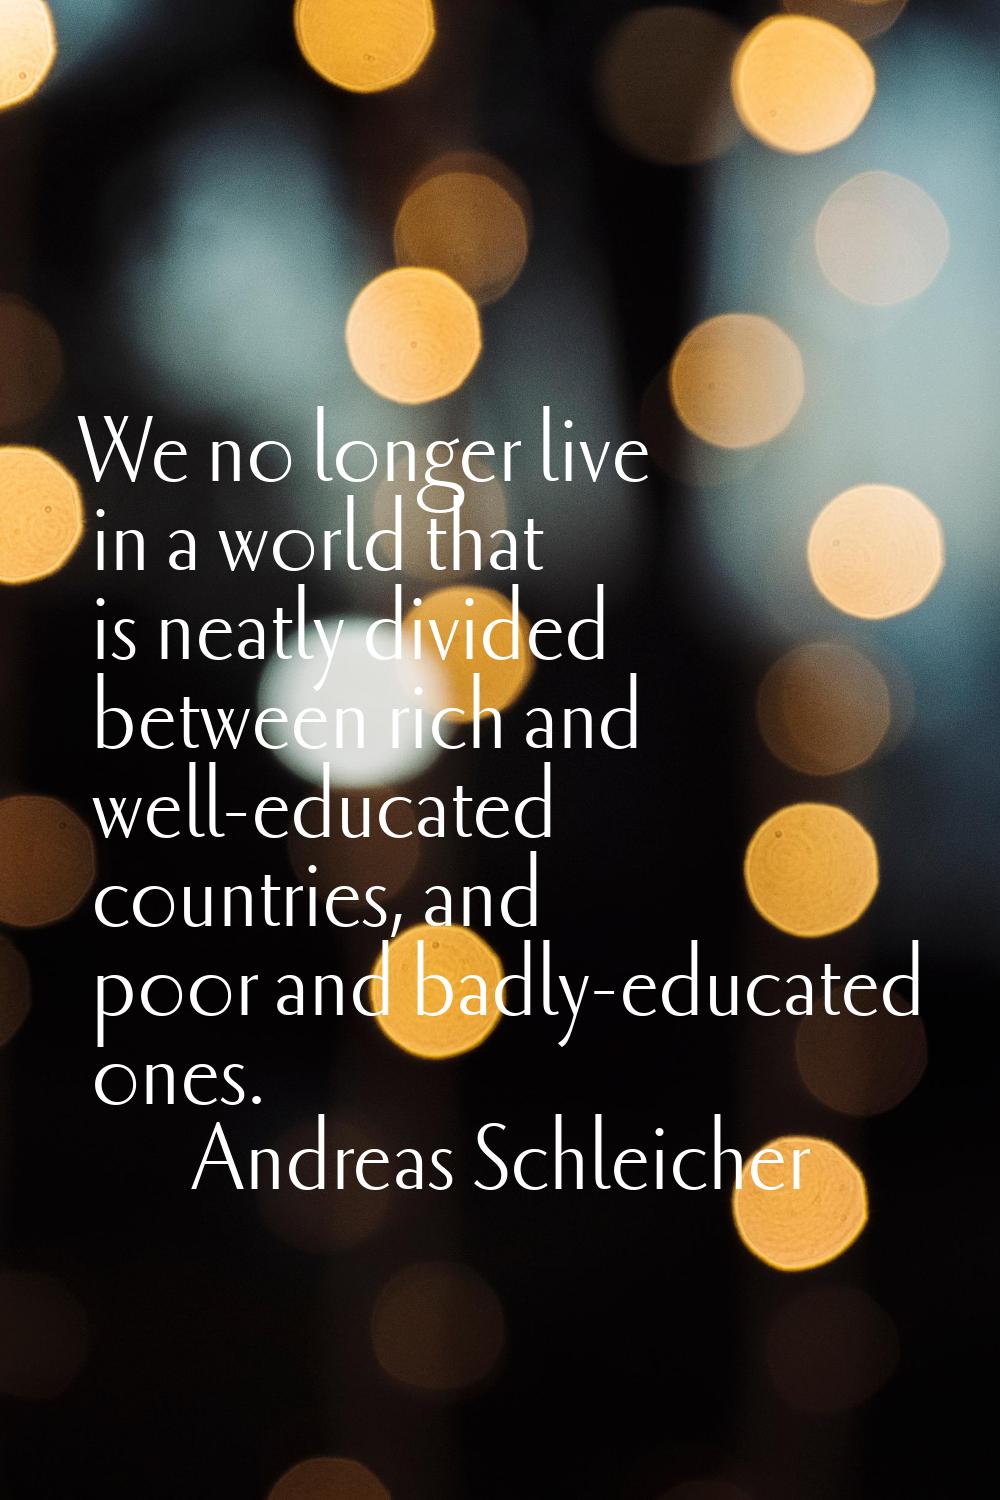 We no longer live in a world that is neatly divided between rich and well-educated countries, and p